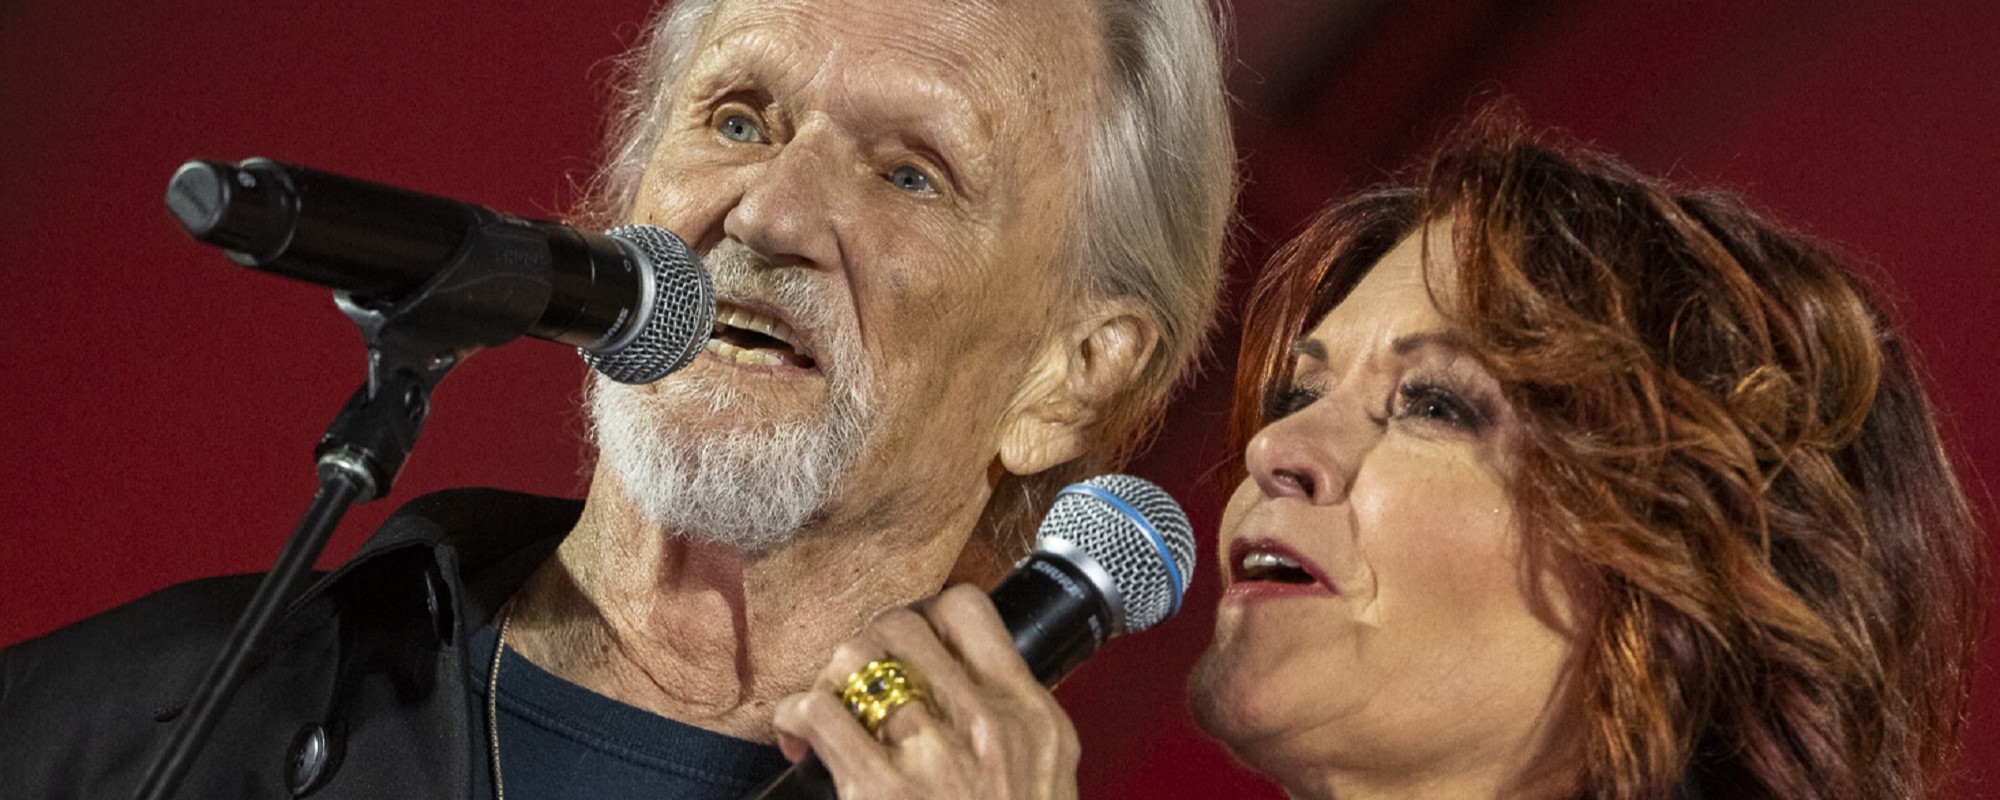 Emotions Flow as Kris Kristofferson Joins Rosanne Cash for Iconic Willie Nelson Birthday Performance